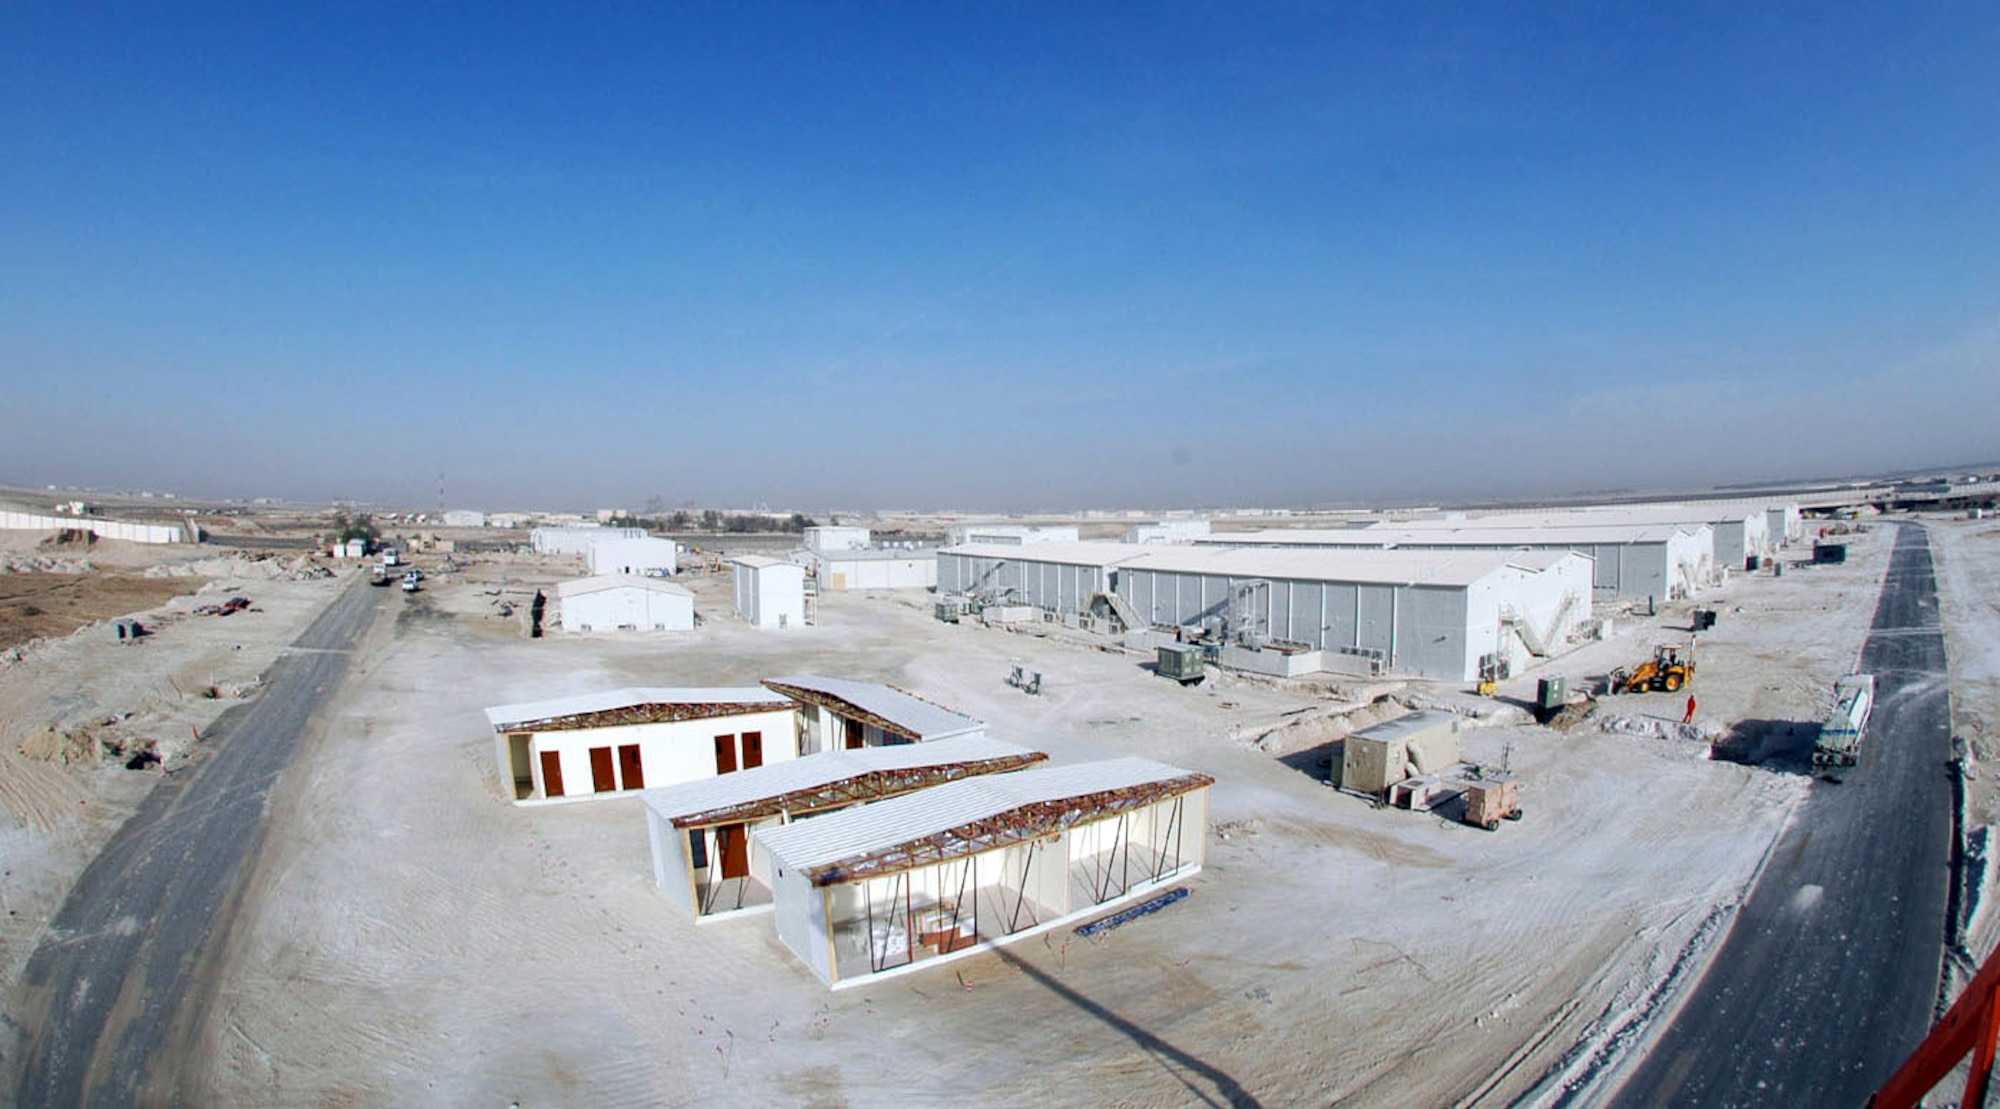 SOUTHWEST ASIA (AFPN) -- From a bird's eyes view the new Temporary Cantonment Area for the 380th Air Expeditionary Wing begins to take shape. Units with the Wing are expected to move into the new facilities in April. (U.S. Air Force photo by Joey Shumate)